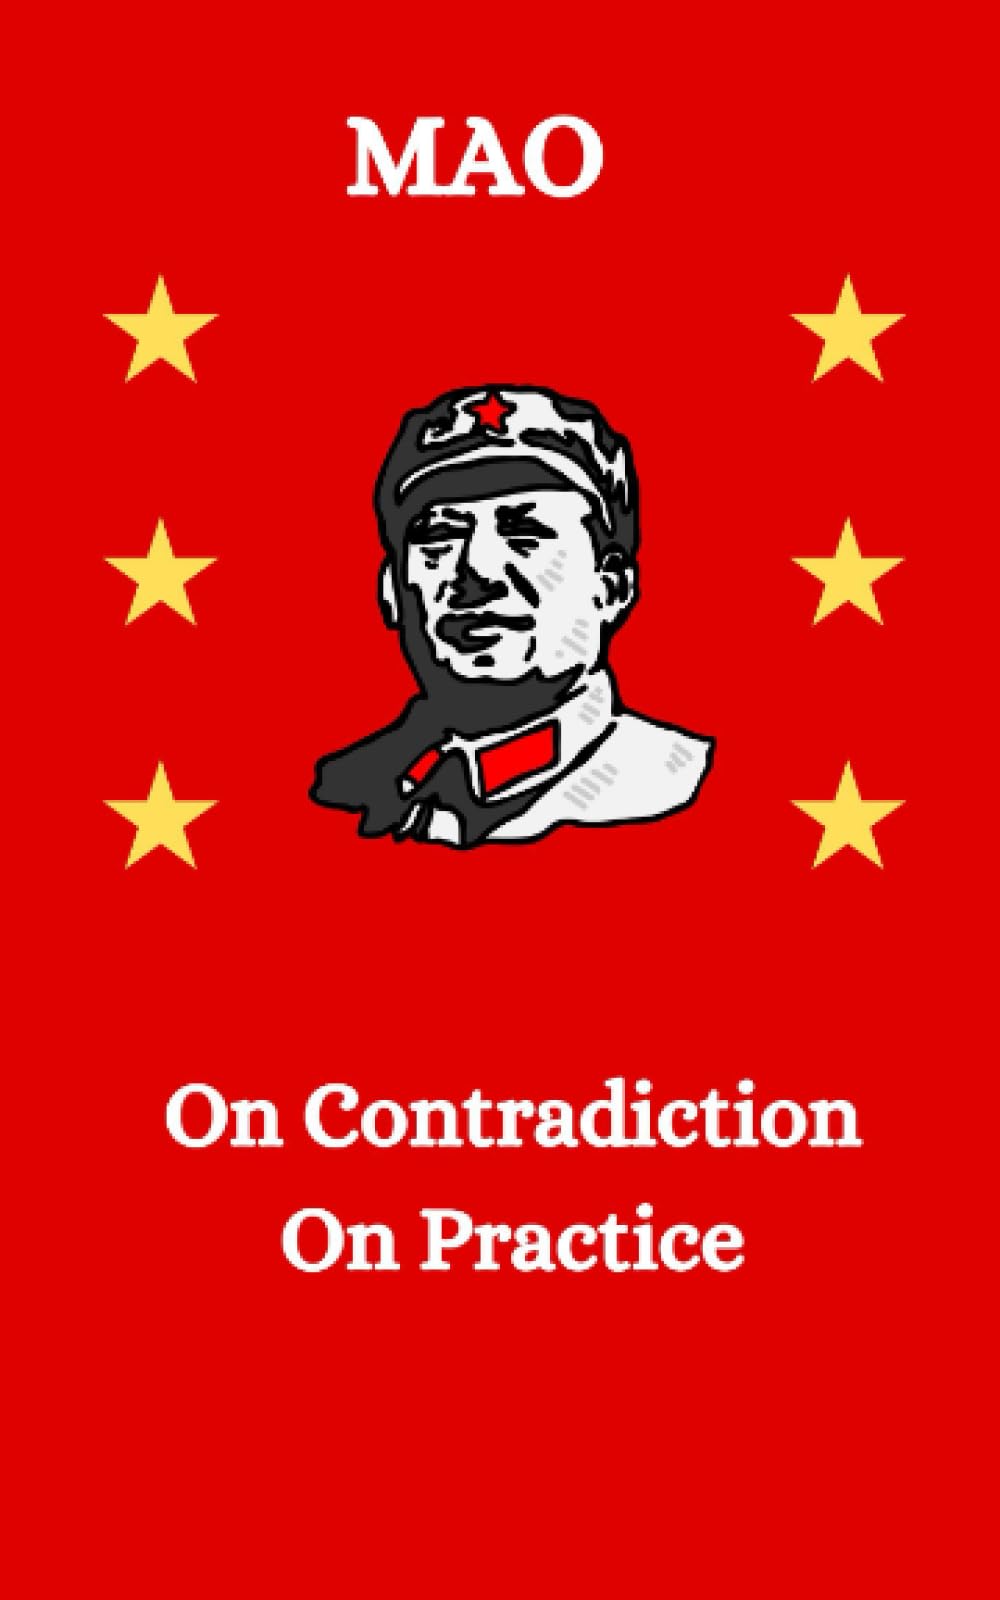 Mao: On Contradiction and On Practice